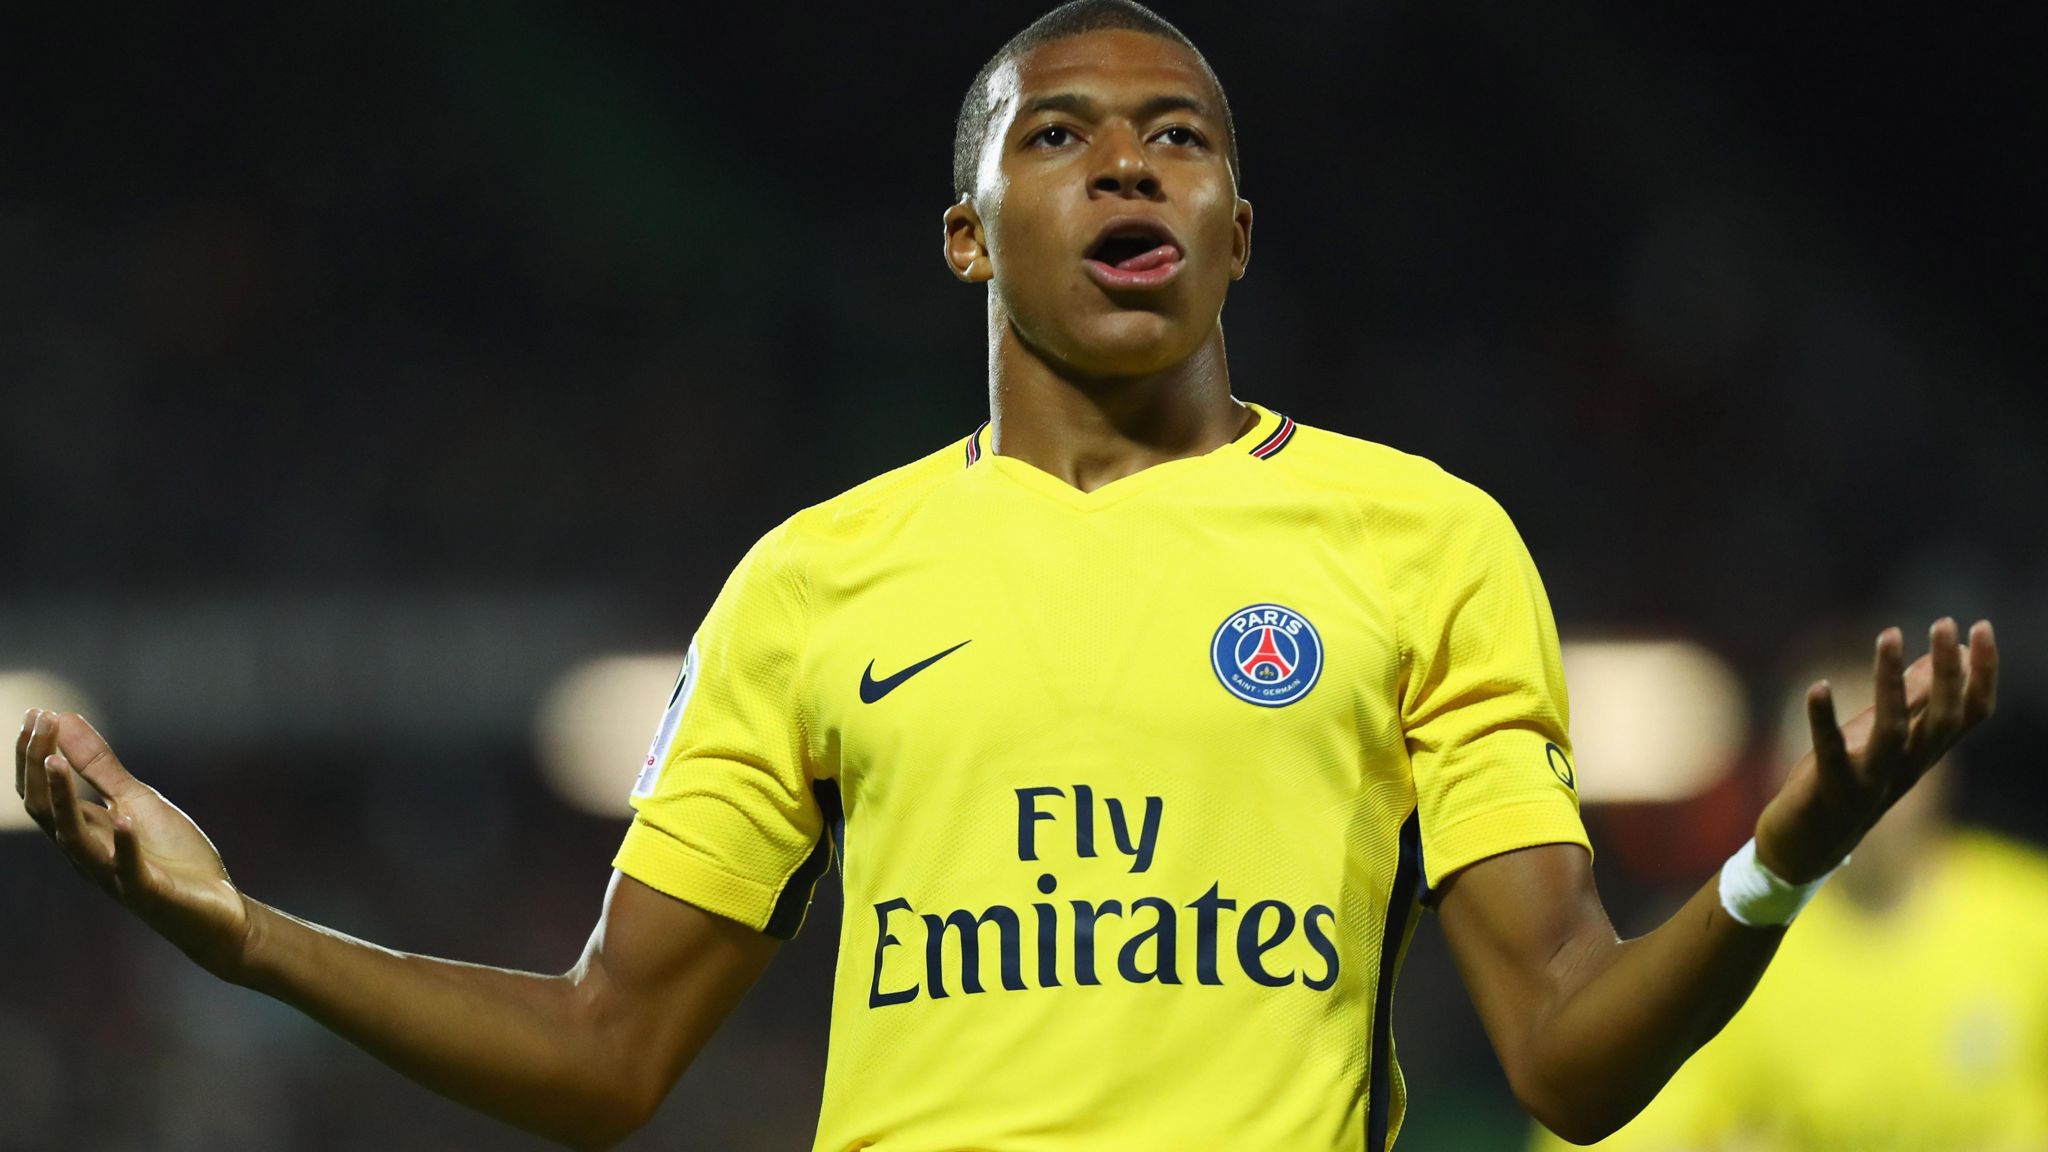 Mbappe celebrates with a shrug, while playing for PSG against Metz